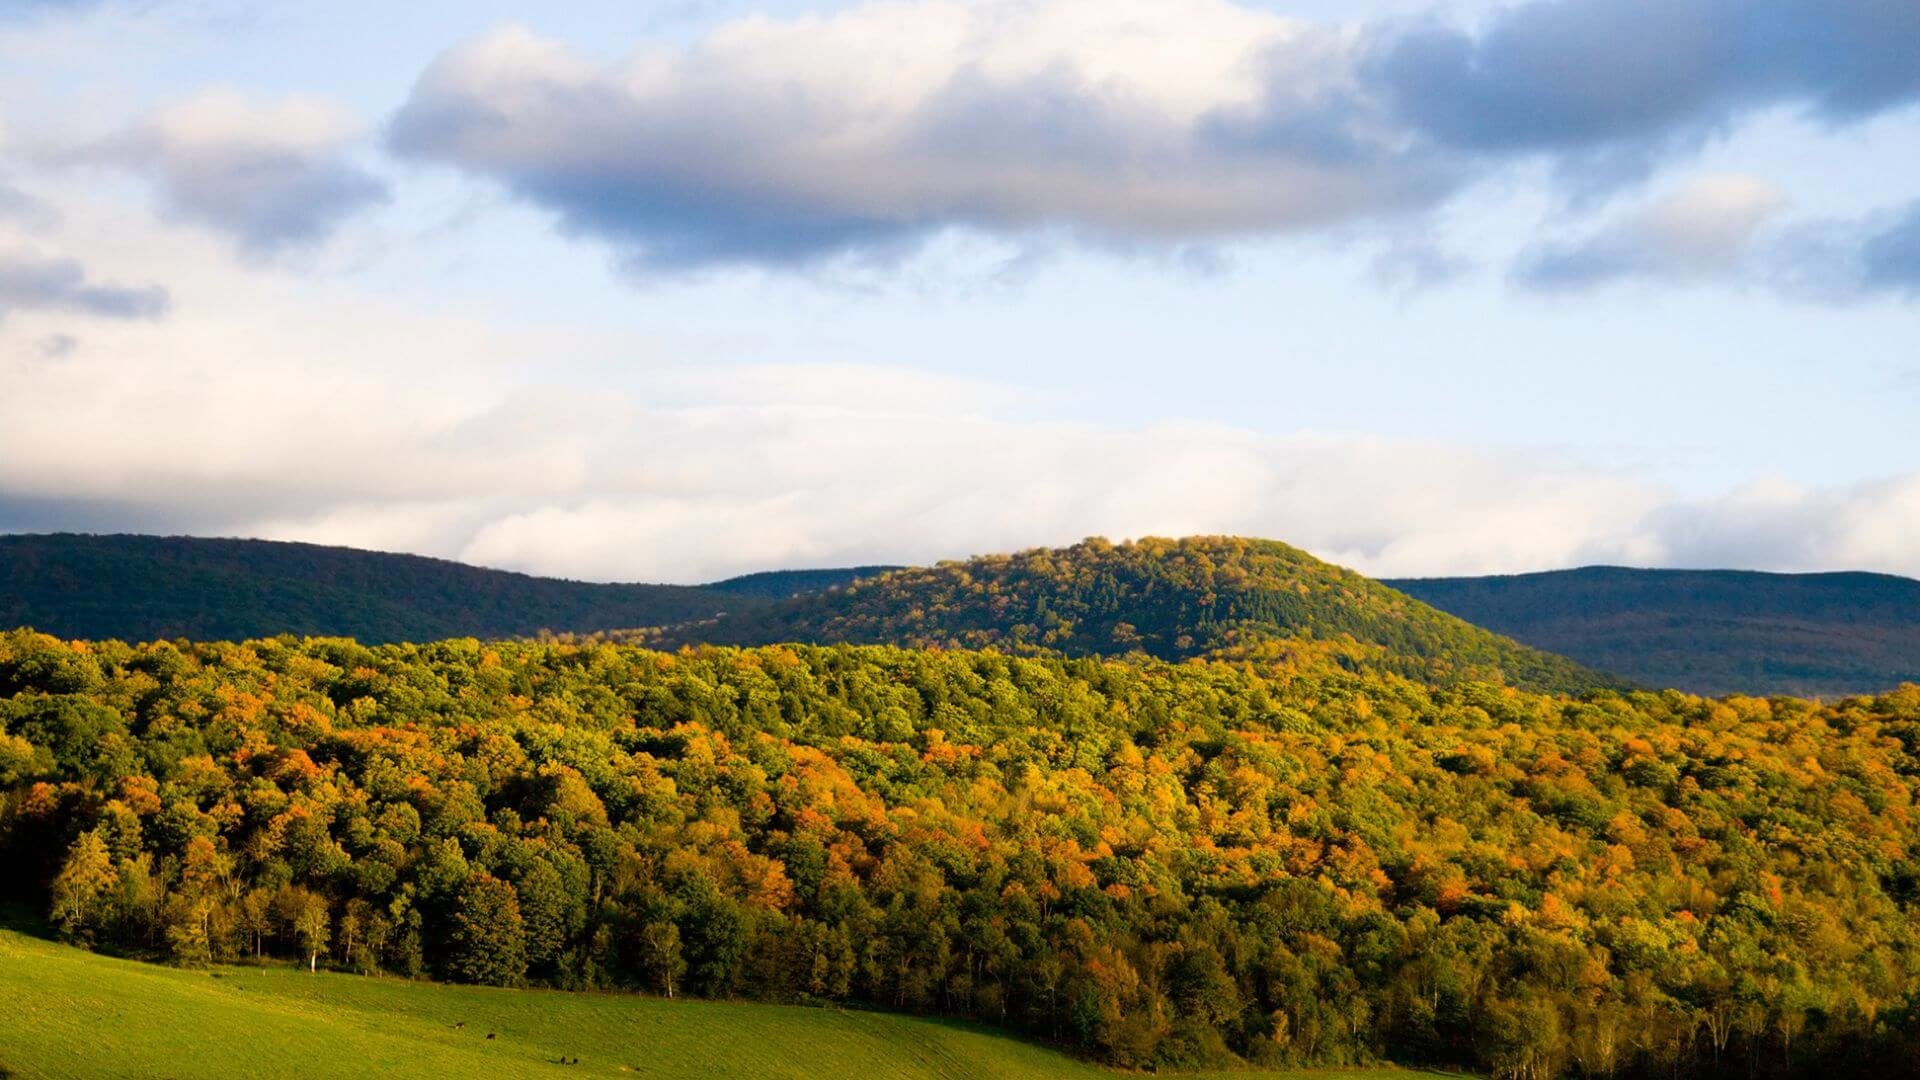 Rolling hills with trees containing fall color